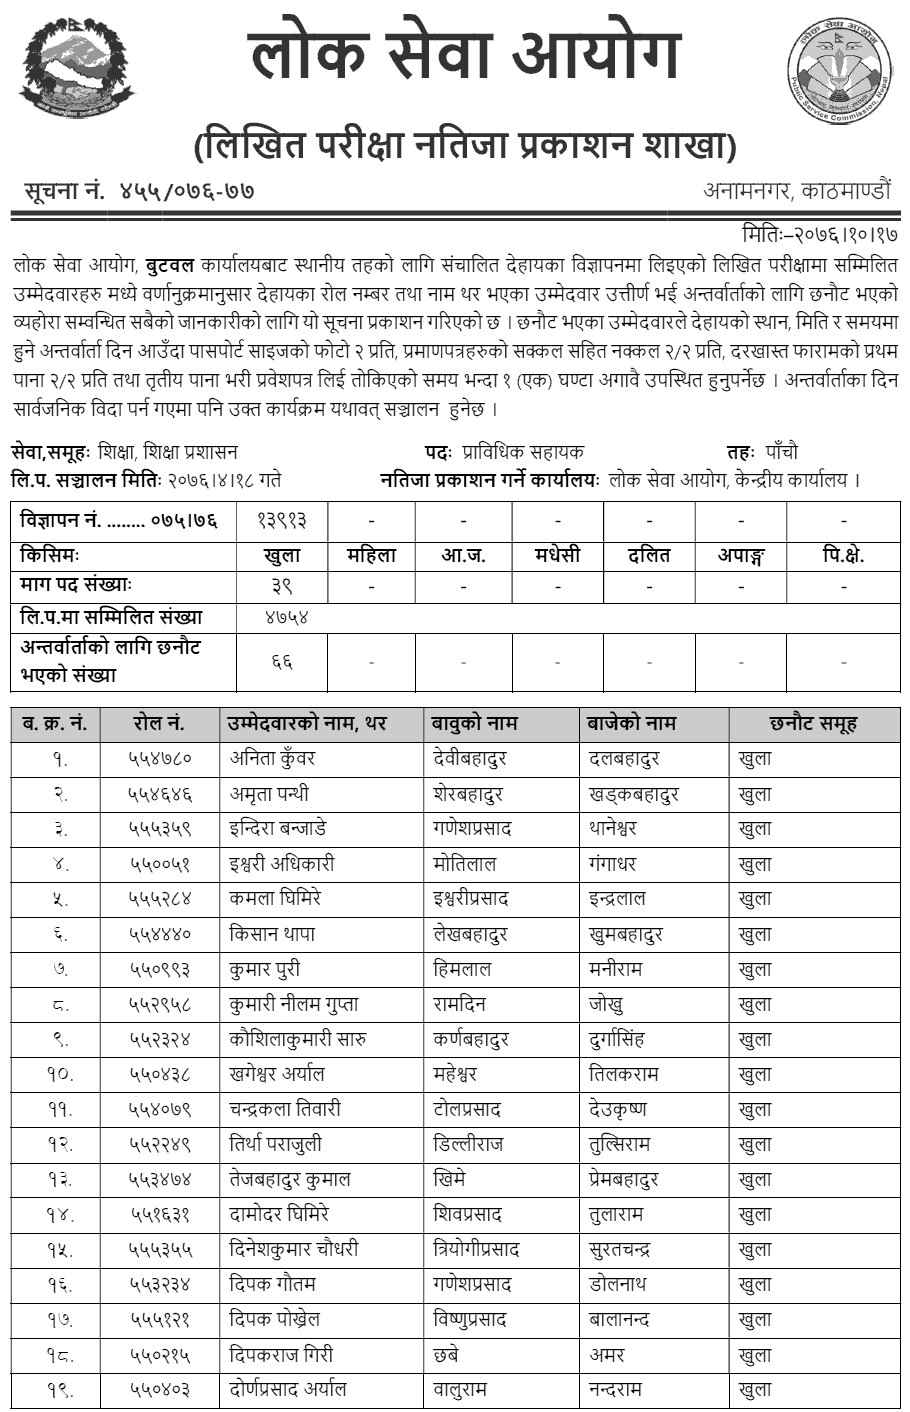 Lok Sewa Aayog Butwal Local Level 5th Education Technical Assistant Written Exam Result